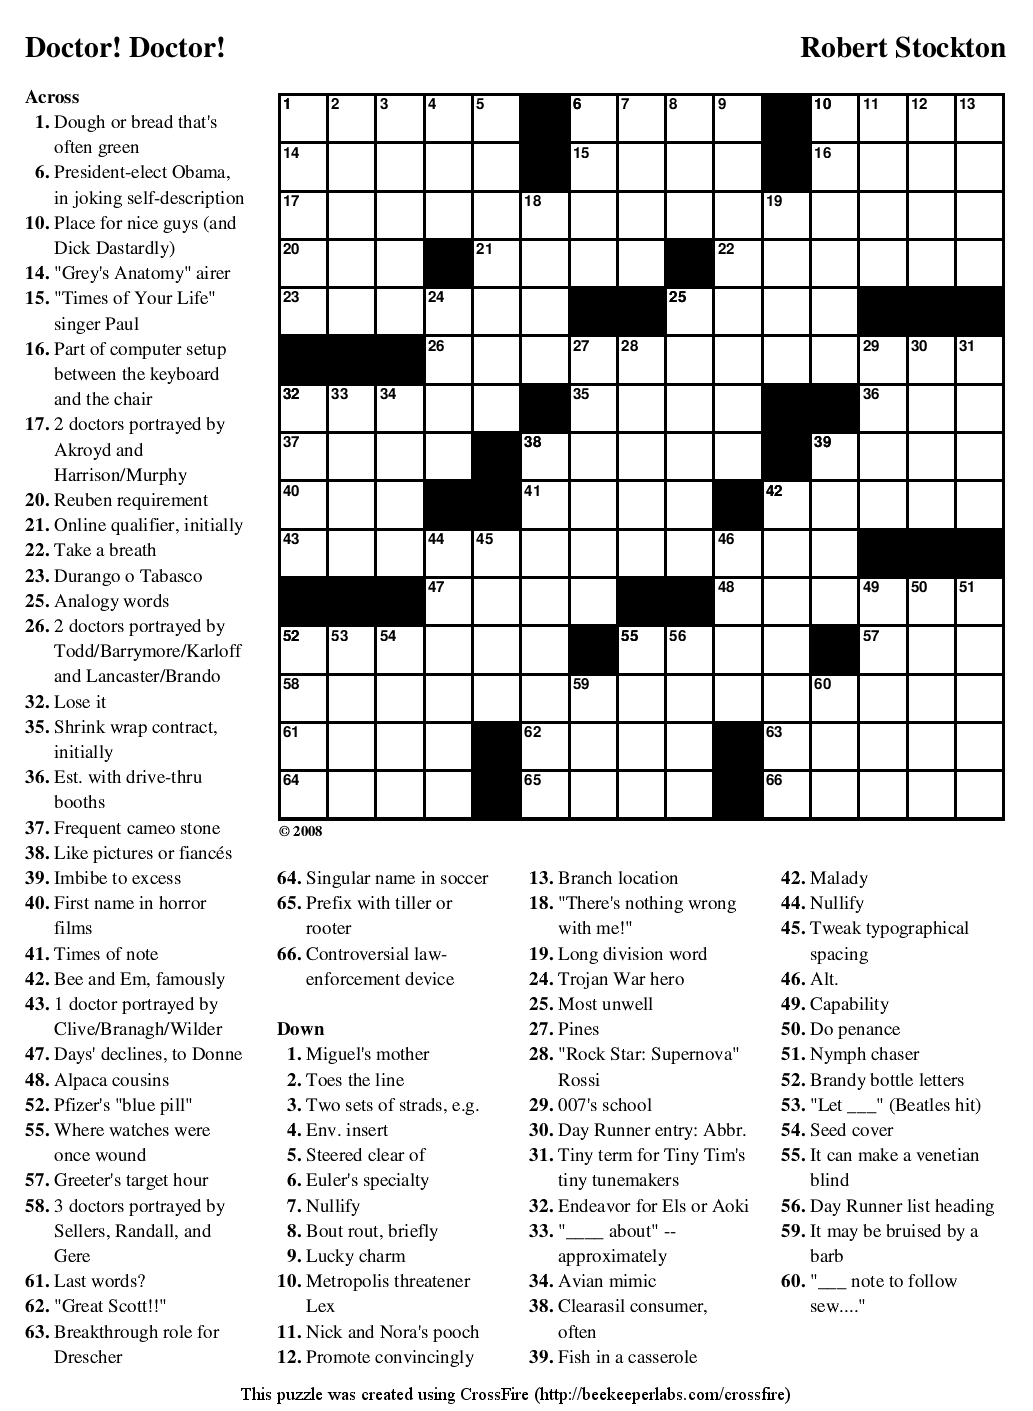 Crossword Puzzles Printable - Yahoo Image Search Results | Crossword - Crossword Puzzle Generator Free Printable